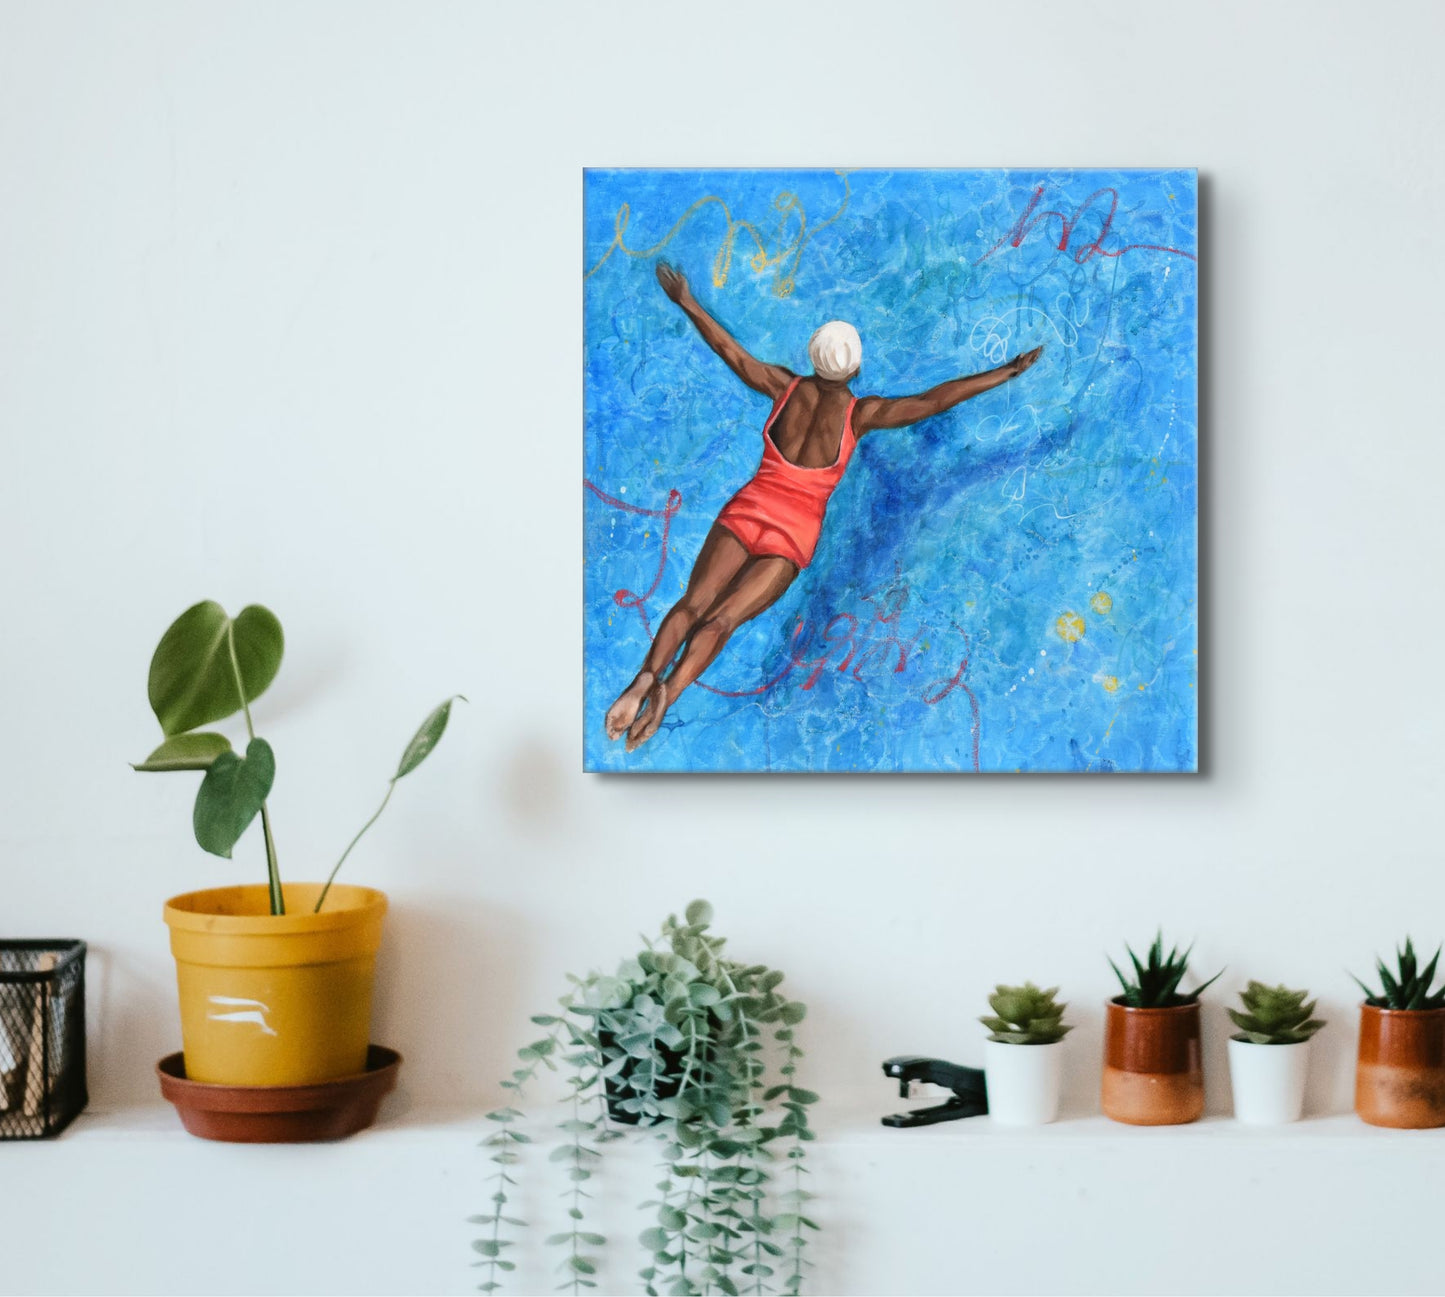 Learning To Fly - Original Painting on Canvas